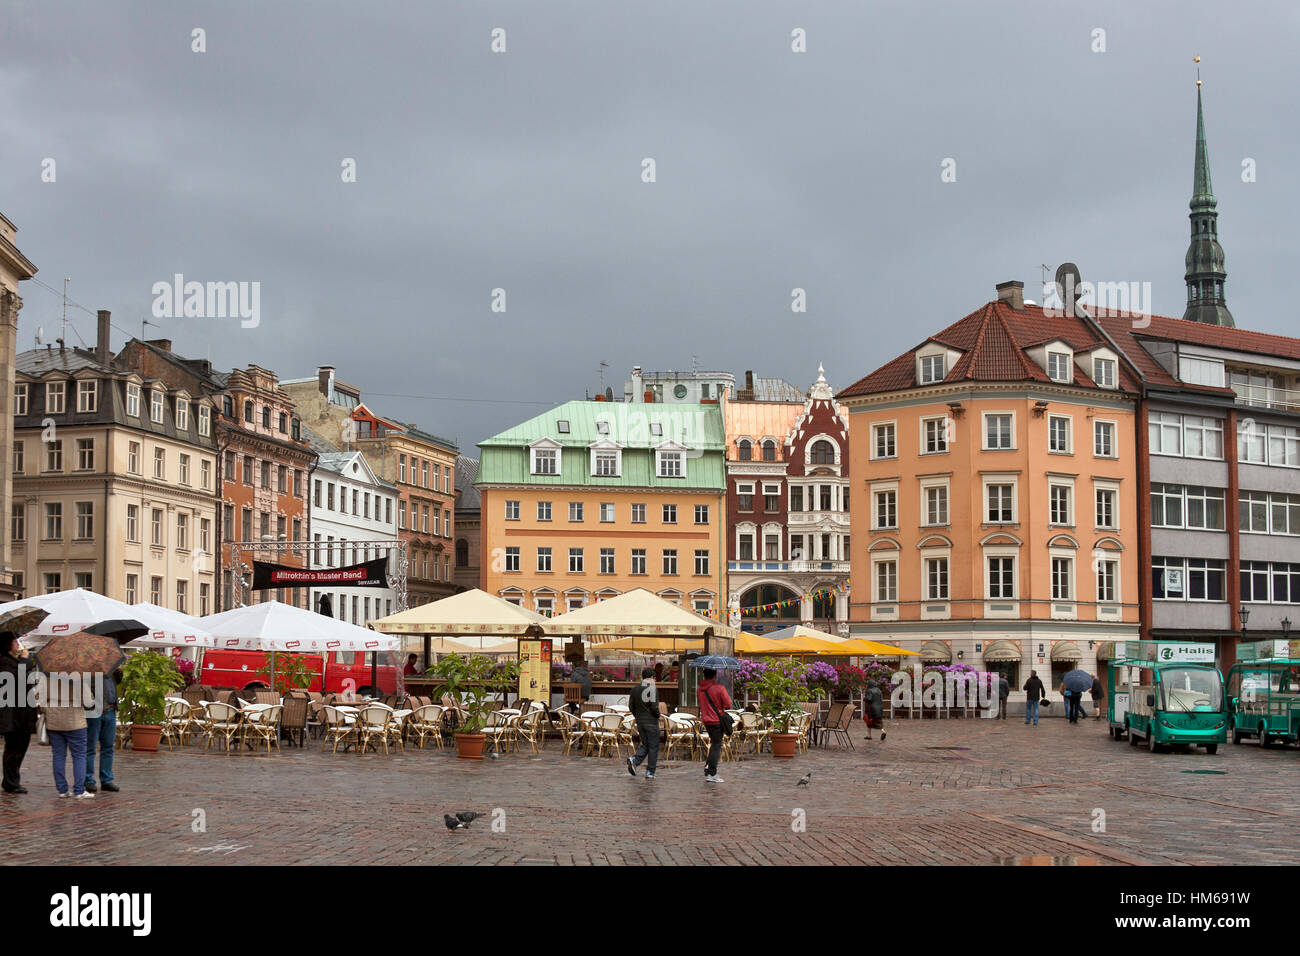 RIGA, LATVIA - JUNE 2: Pedestrians walk under the rain on Dome Square on  June 2, 2012 in Riga, Latvia. The Dome Square is considered to be the heart  o Stock Photo - Alamy